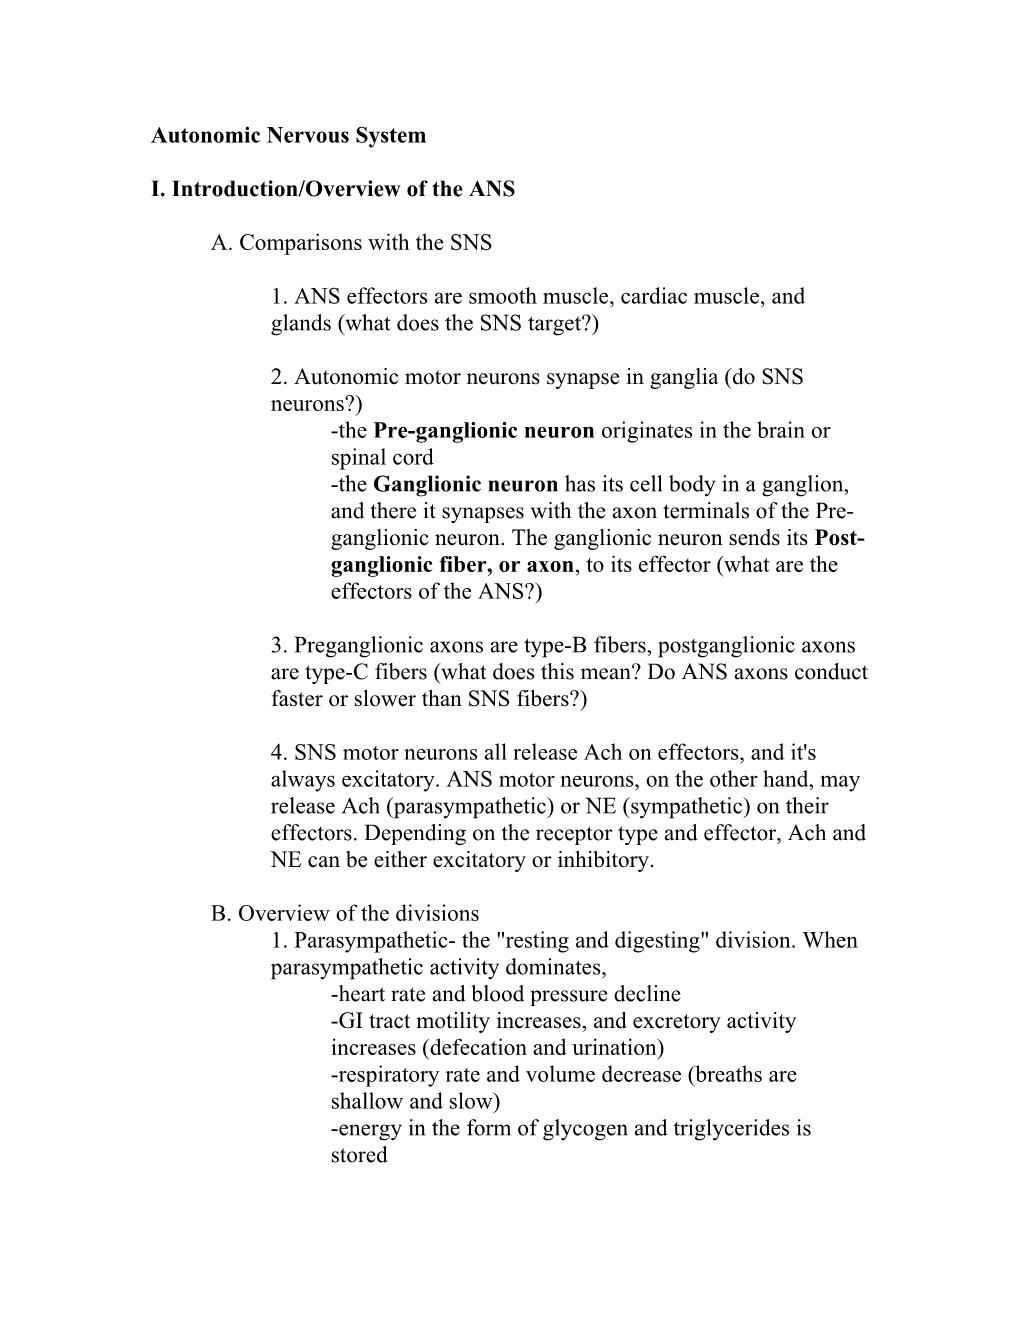 I. Introduction/Overview of the ANS